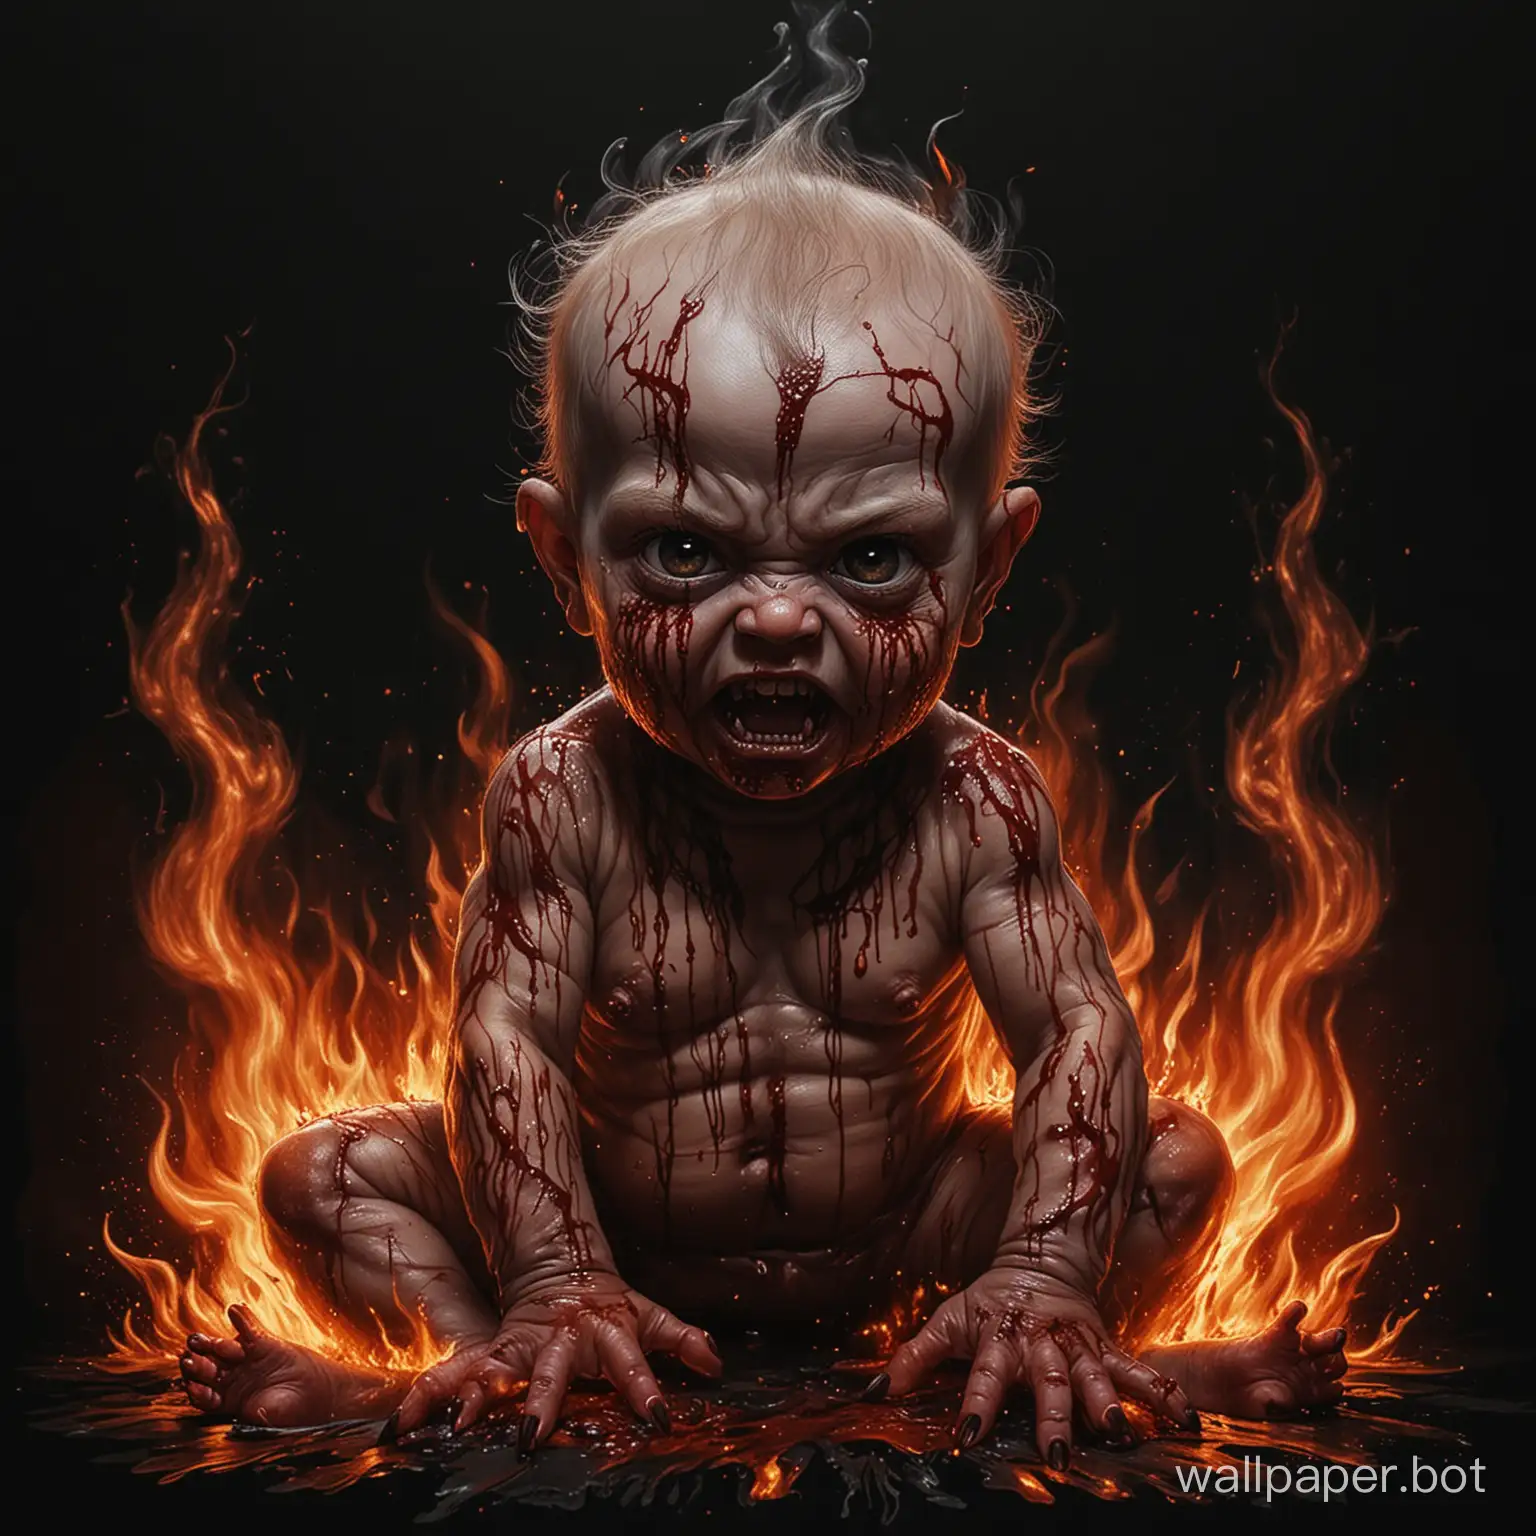 Sinister-Demon-Baby-Surrounded-by-Flames-and-Blood-on-Black-Background